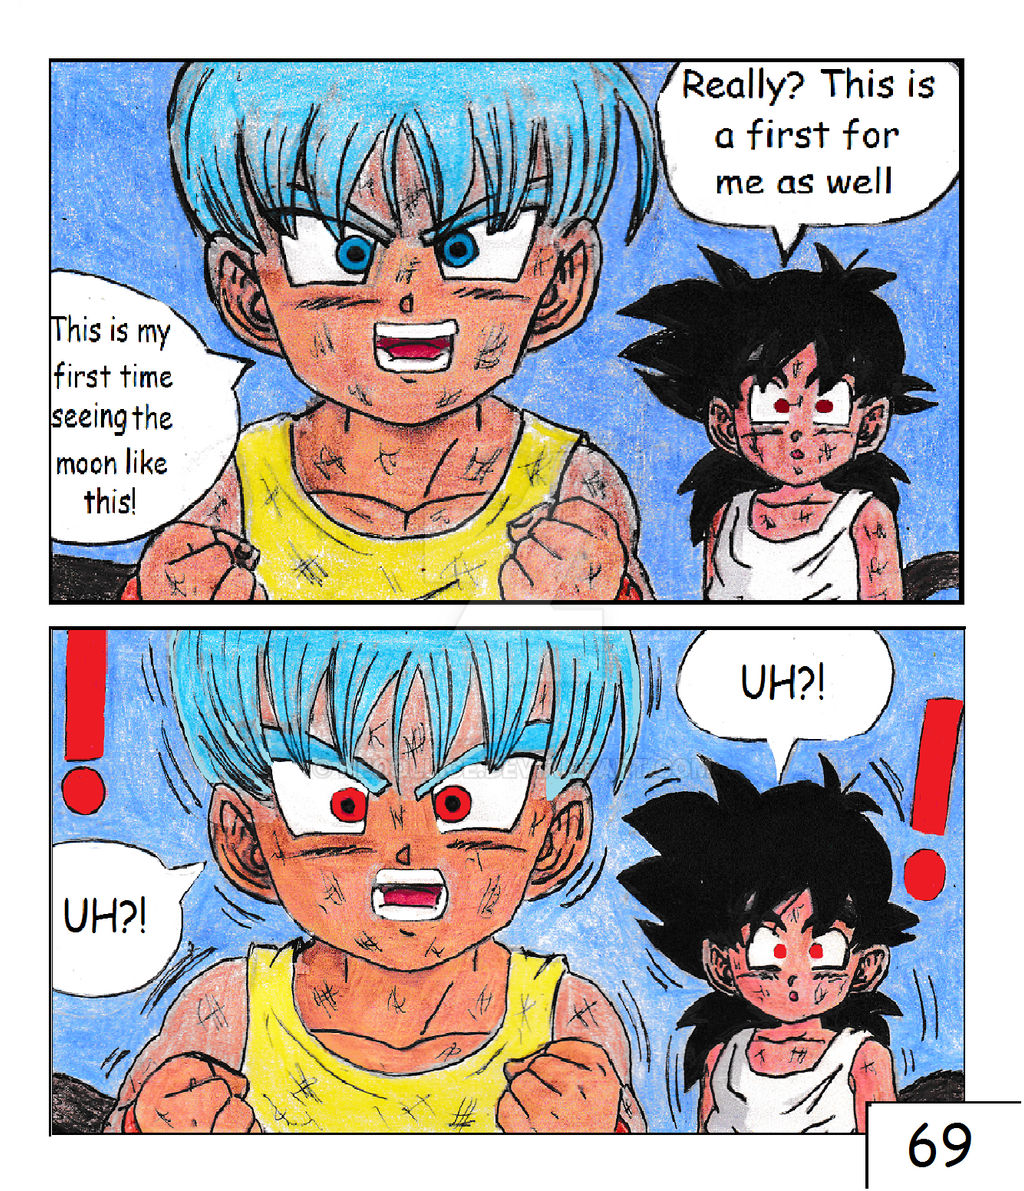 Dragon Ball SF Volume 1 Page 15 by NeoOllice on DeviantArt